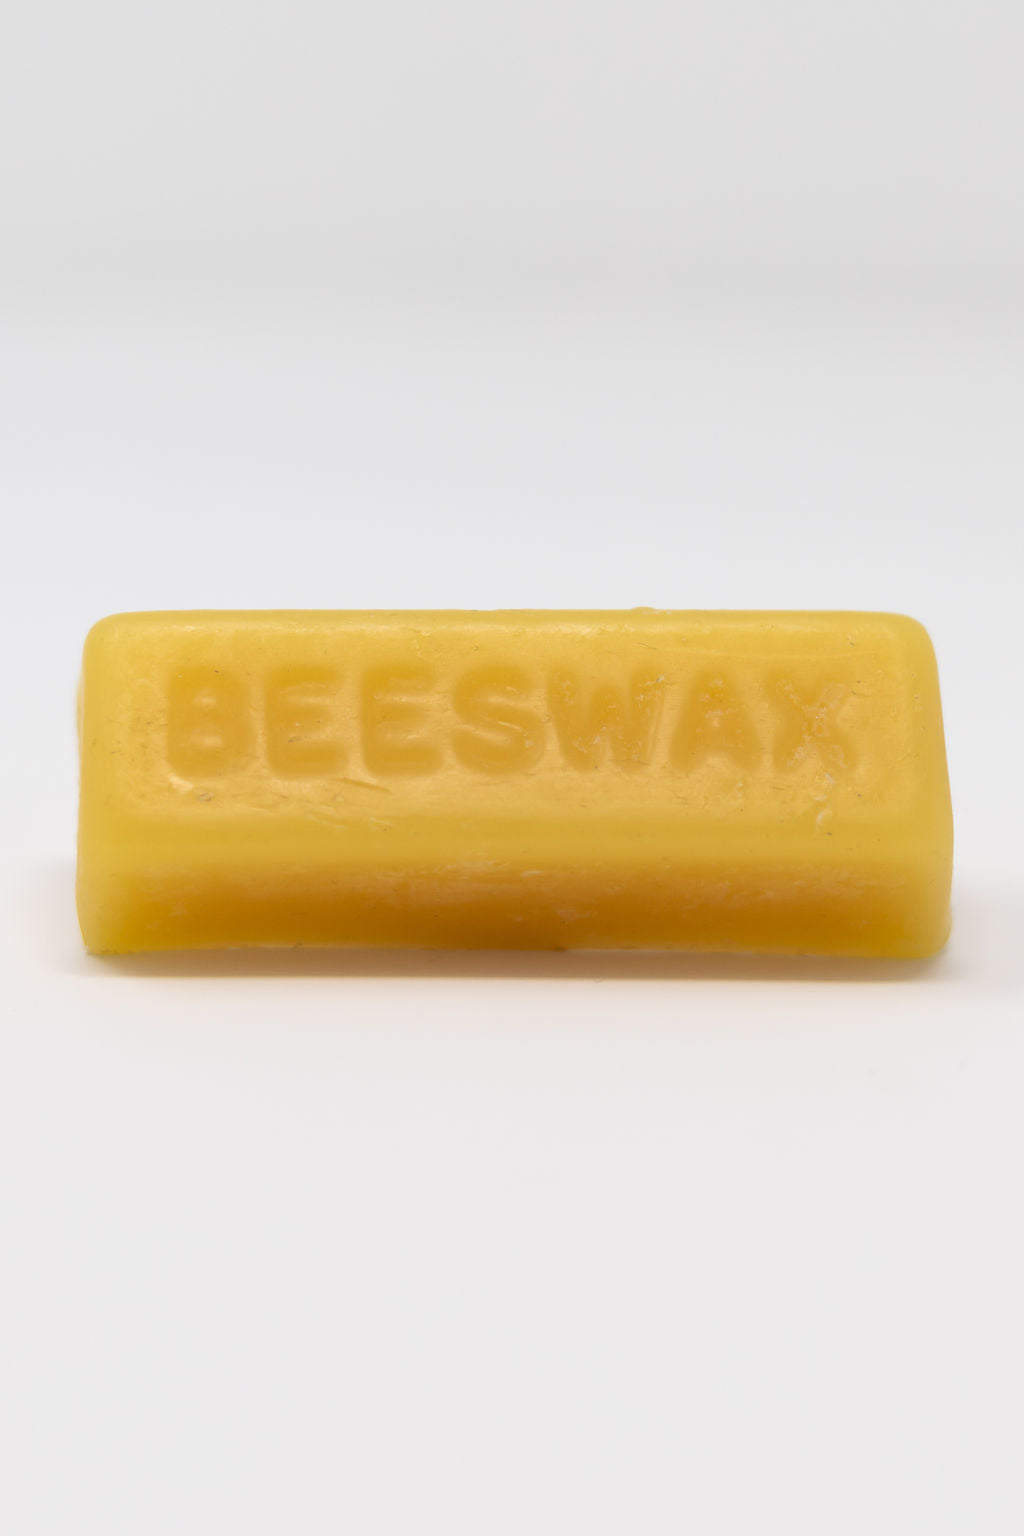 The Bee Box - All-Natural Beeswax - 1 oz Bar – Jeffries General